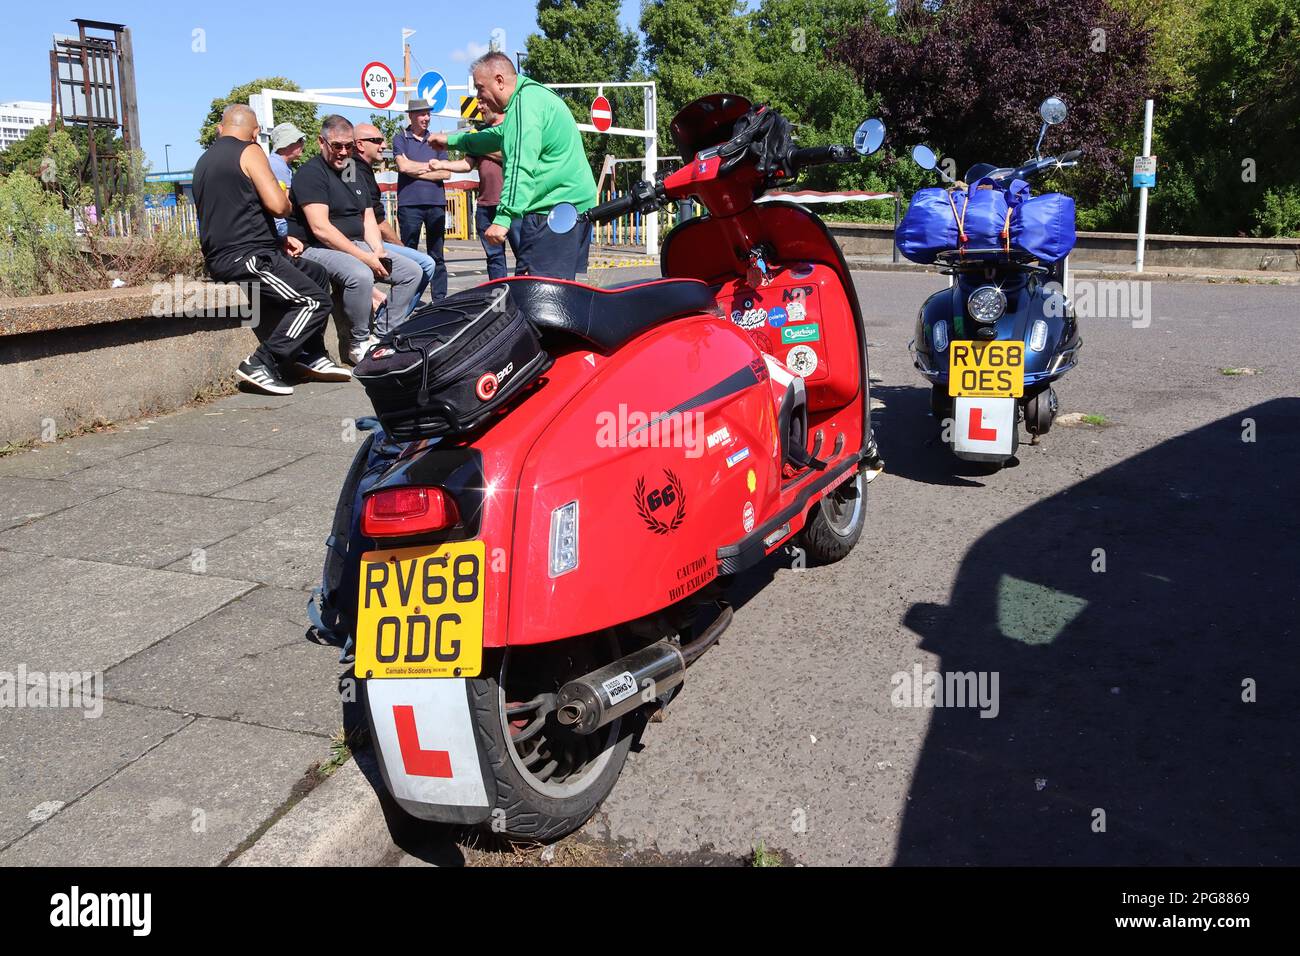 A Royal Alloy and a Lexmoto Milano, a pair of retro styled automatic motor scooters take their styling cues from a Lambretta and Vespa GS respectively. Stock Photo